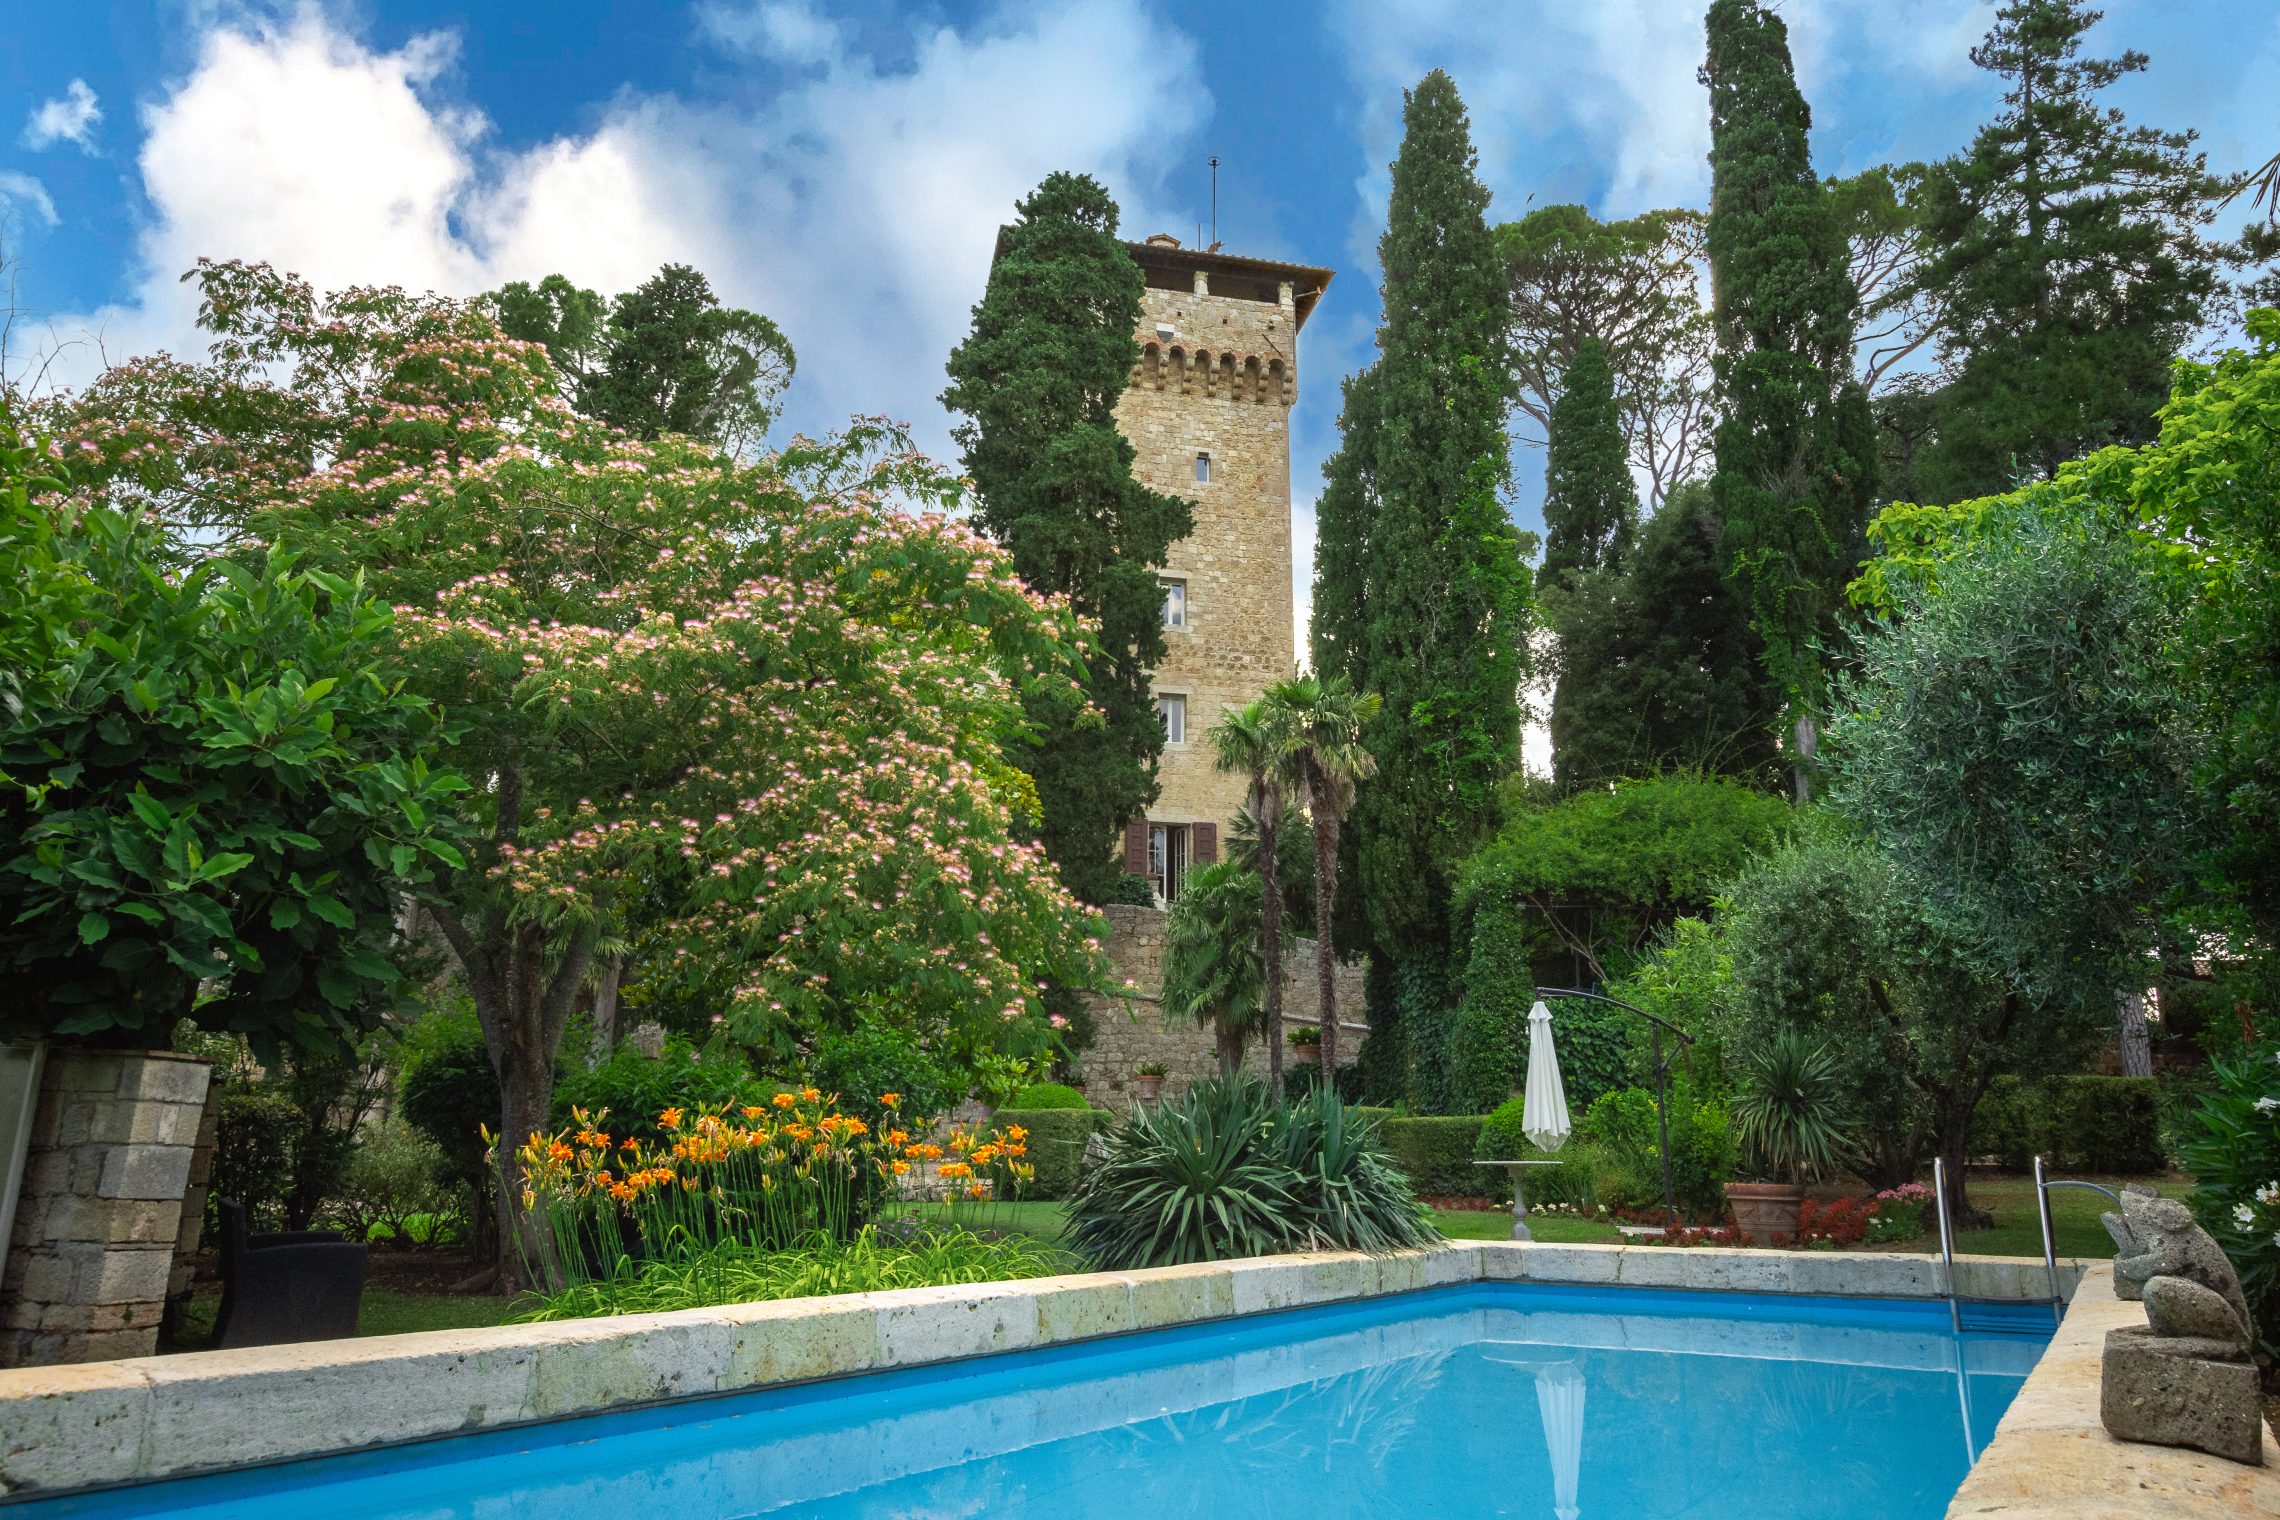 Villa 1500S Medieval tower & pool - CETONA, SIENA, TUSCANY for sale For Super Rich